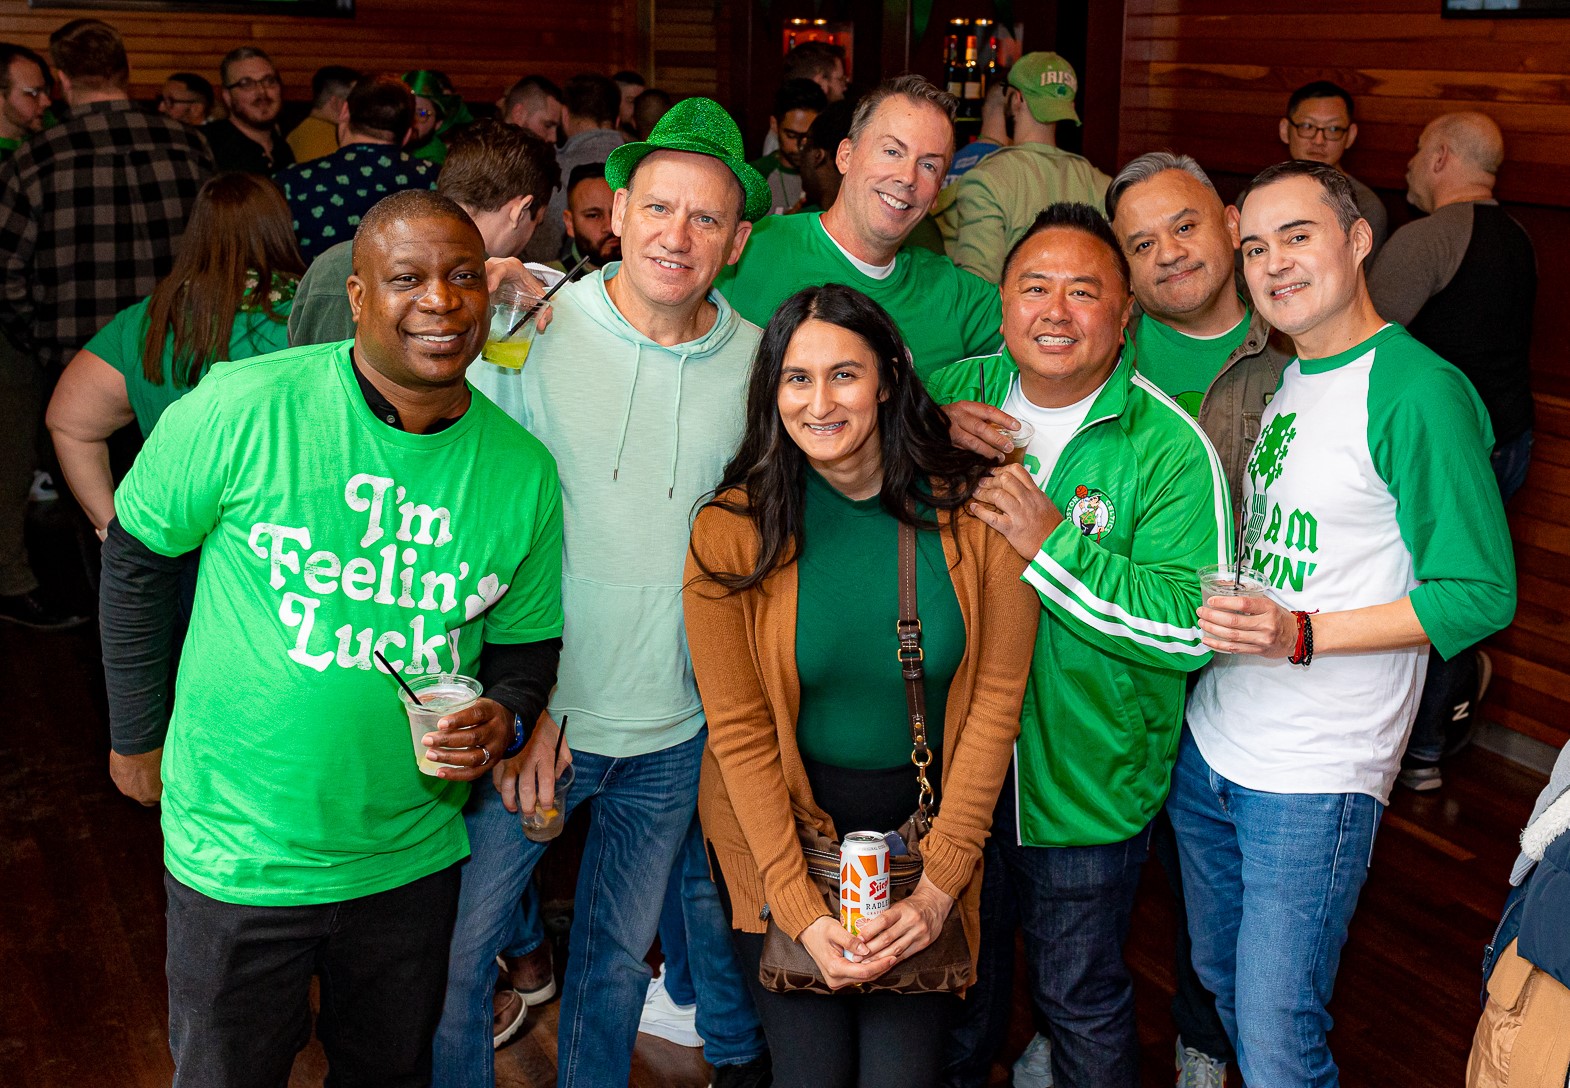 St. Patrick's Day at Sidetrack